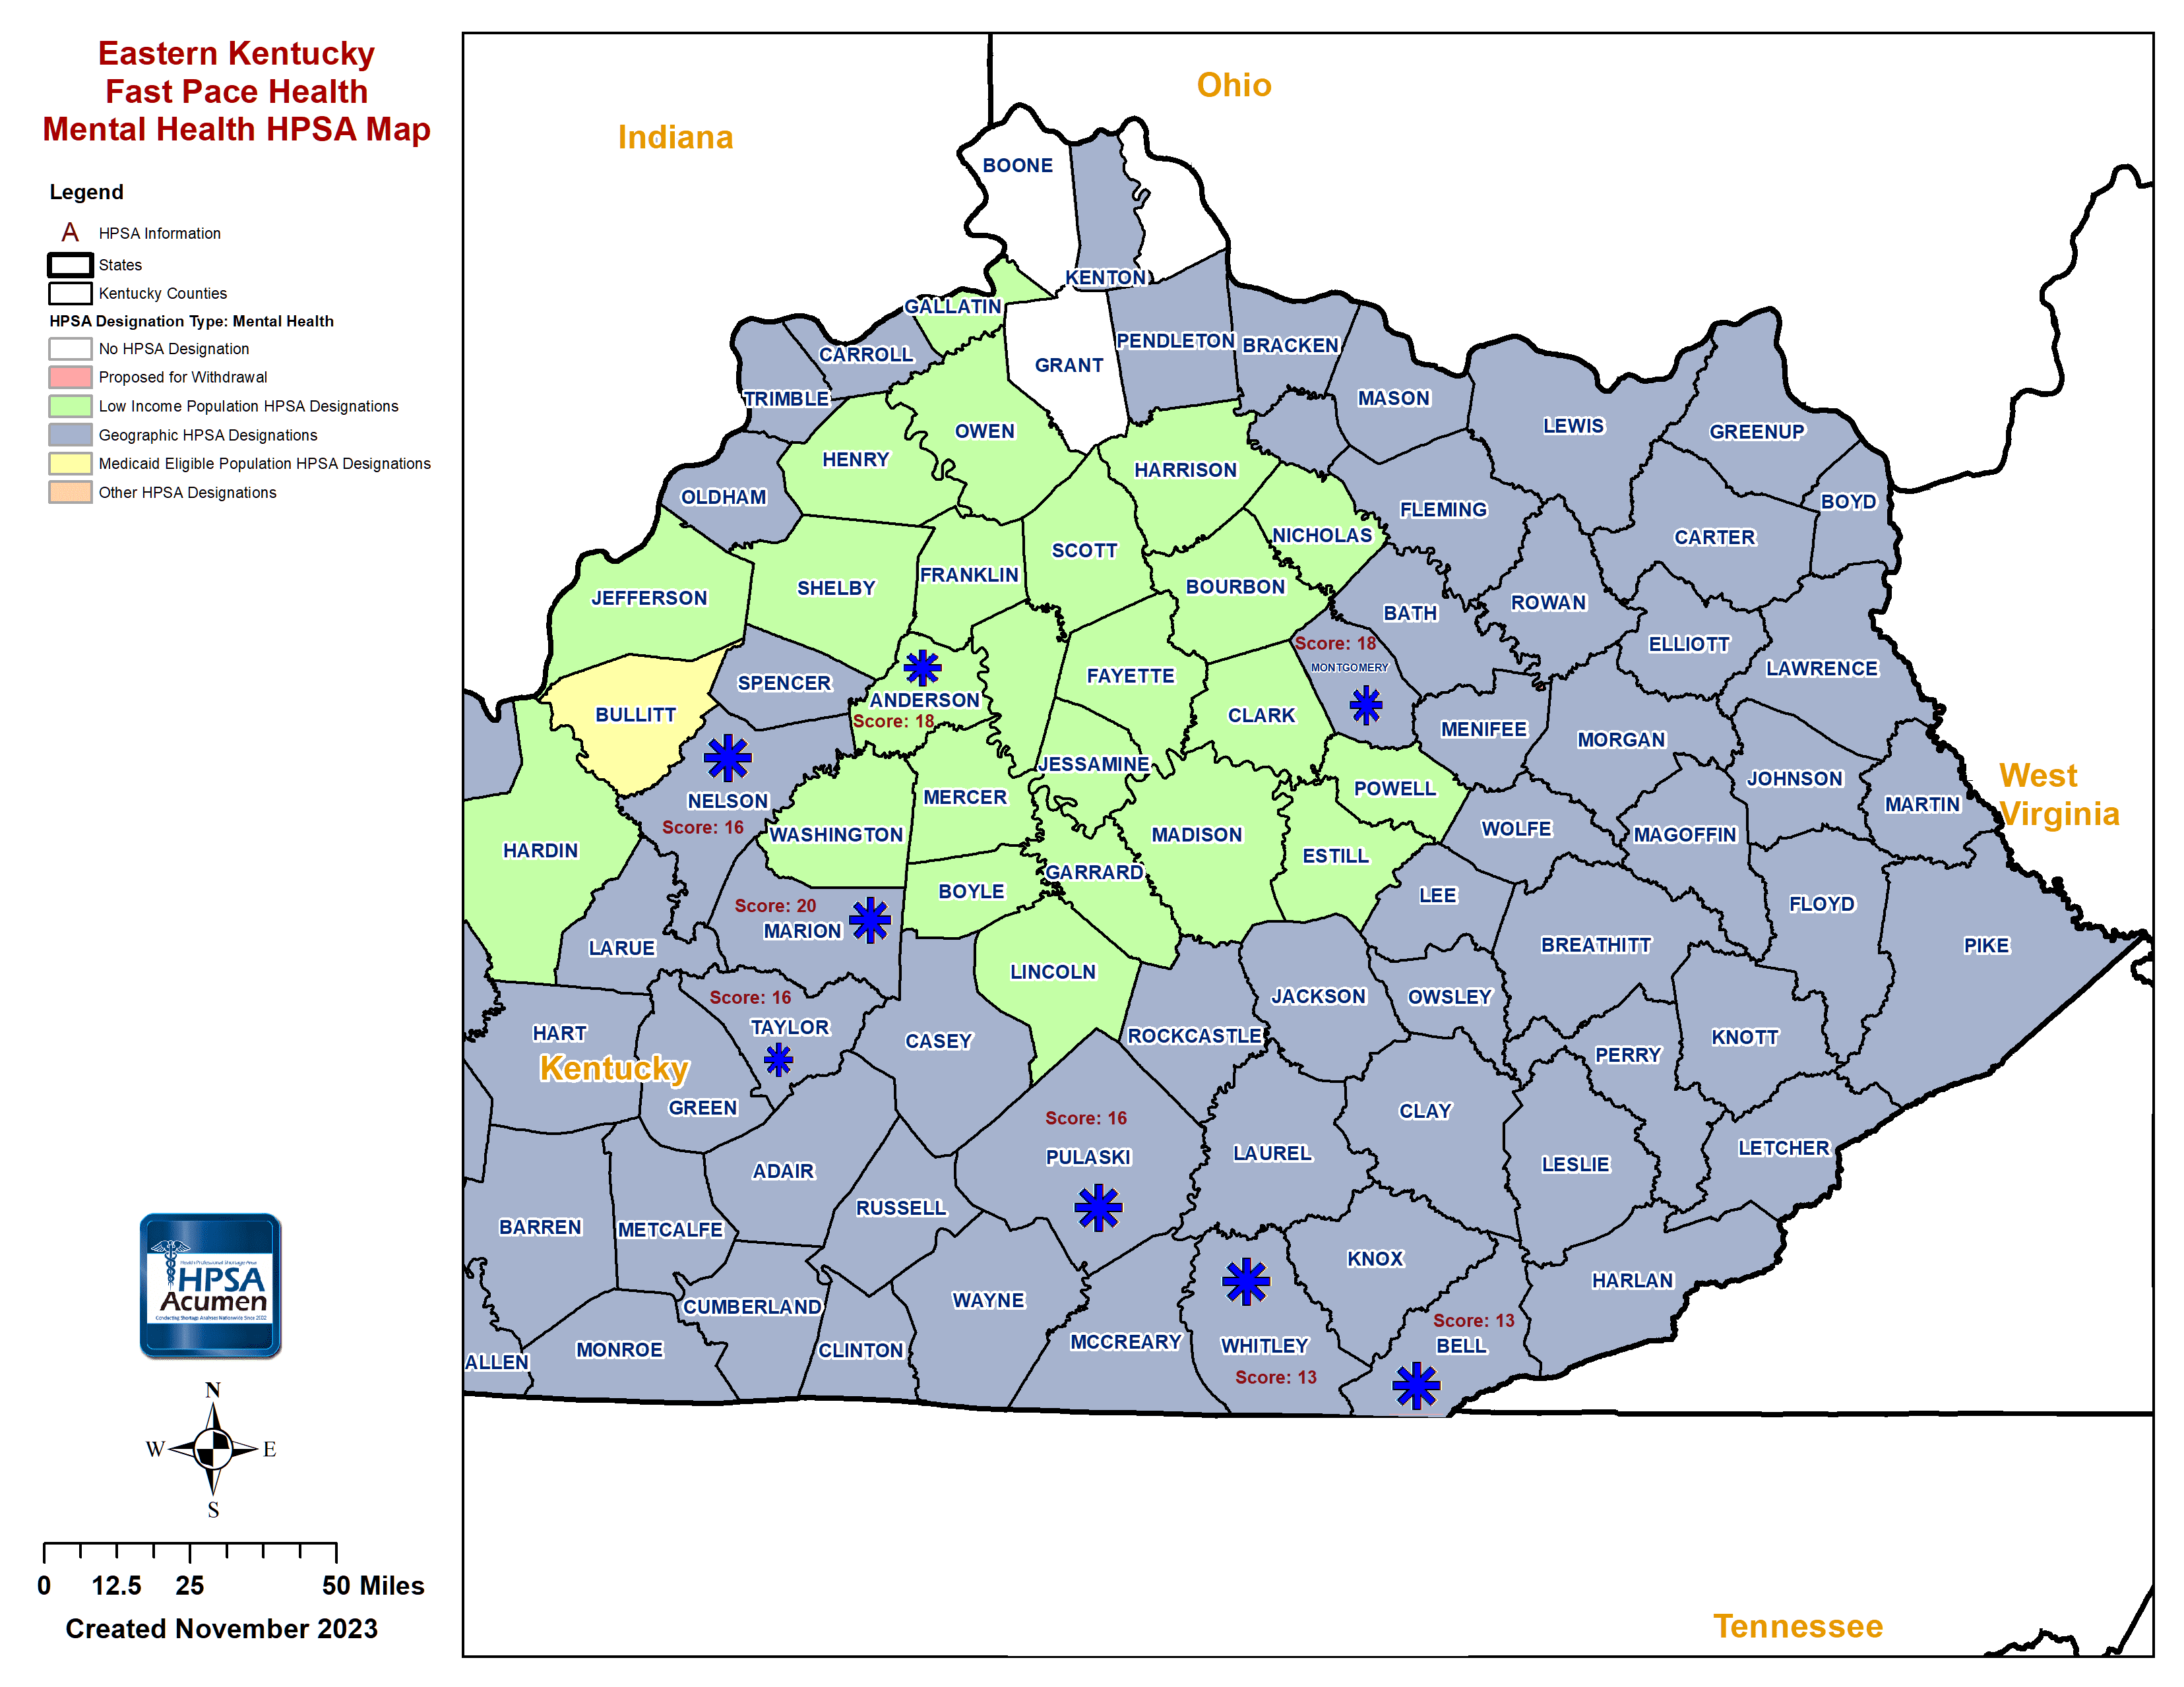 Fast Pace Health Eastern Kentucky MH HPSA Map